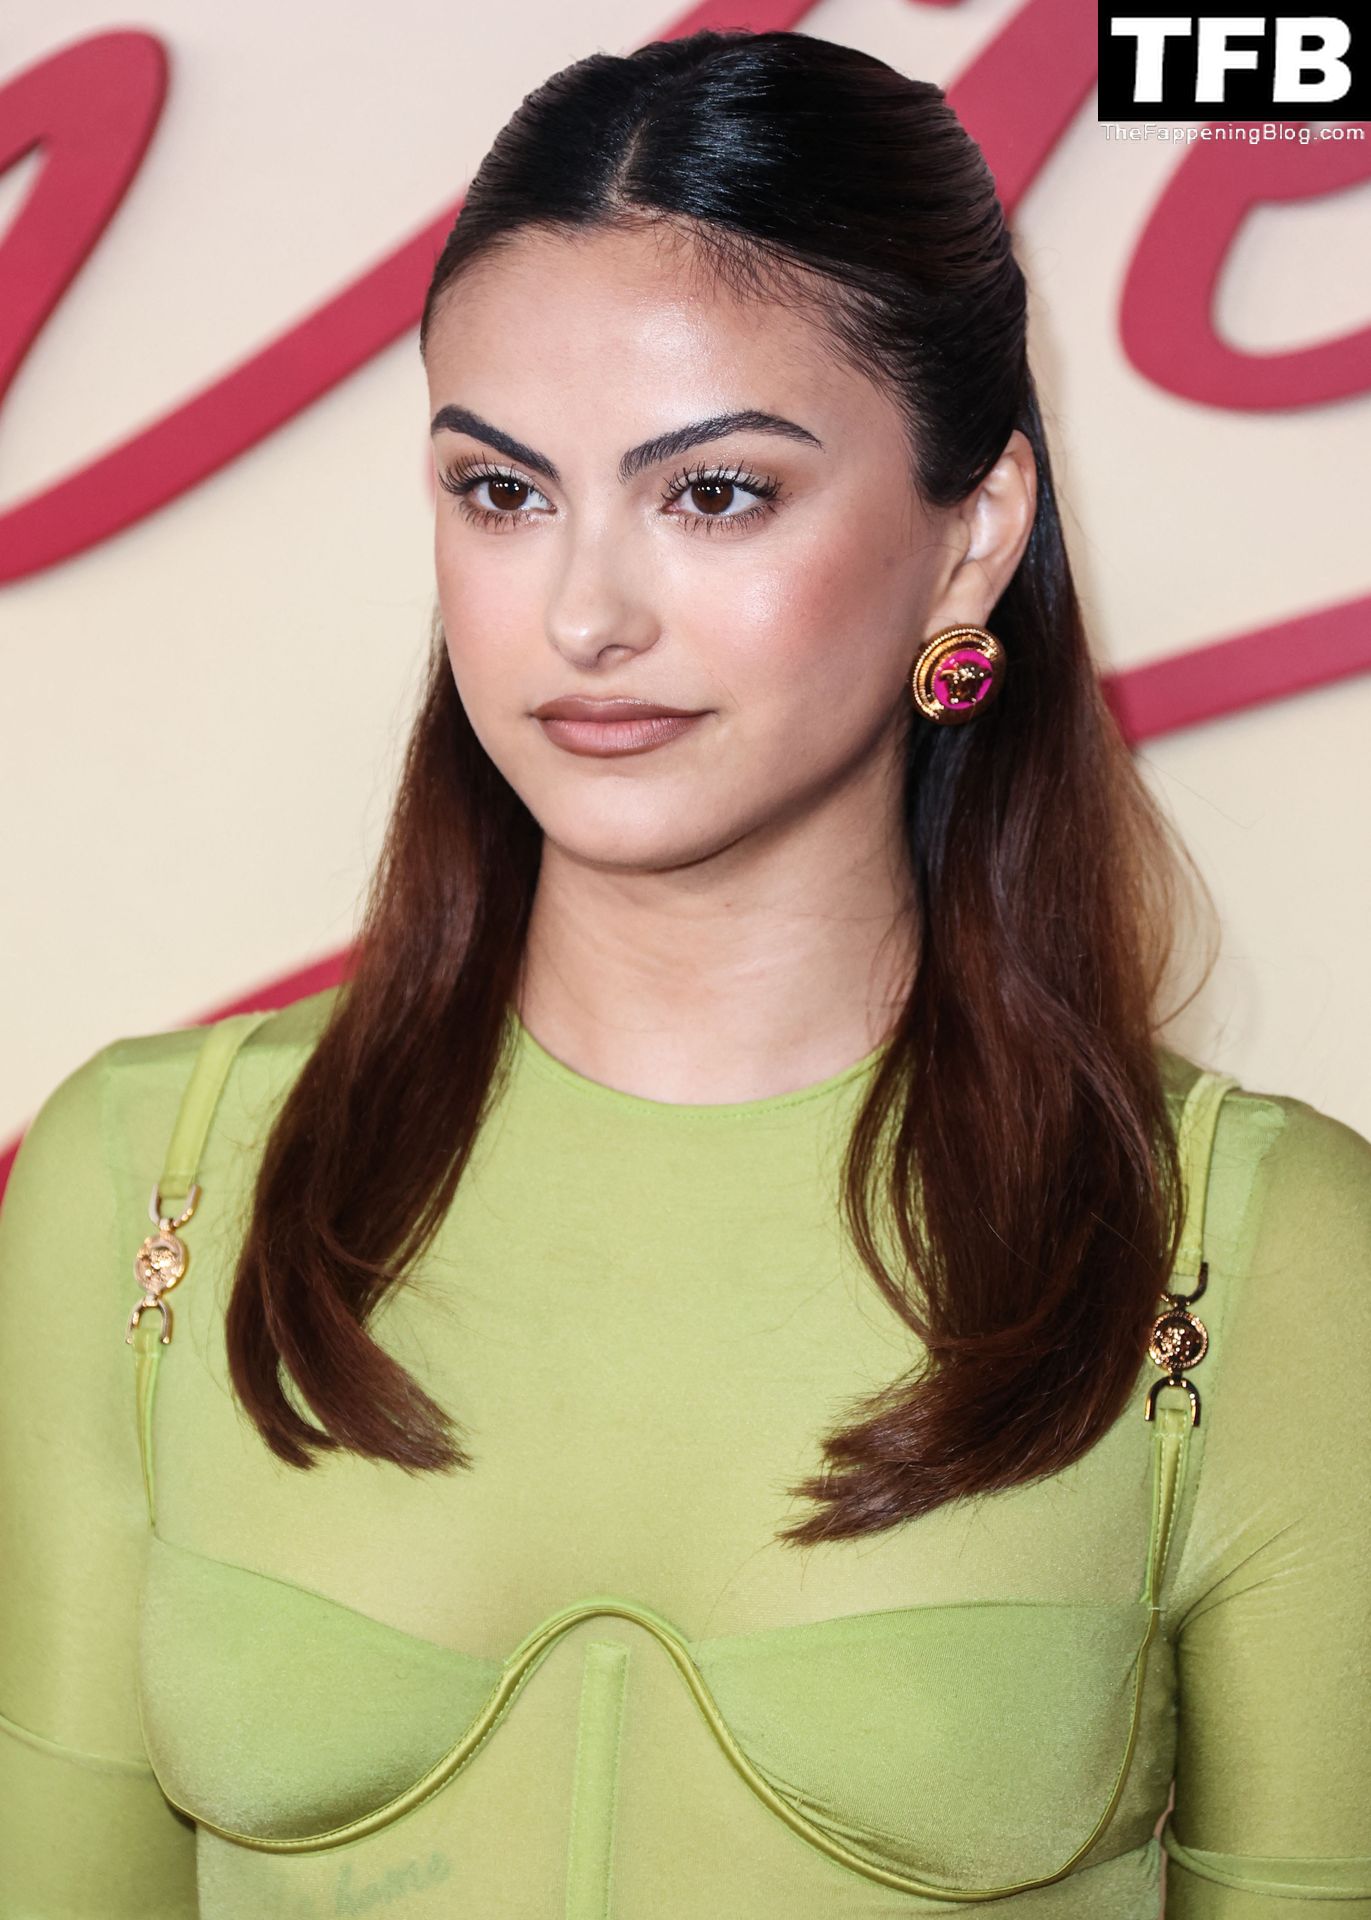 Camila-Mendes-Sexy-The-Fappening-Blog-64.jpg